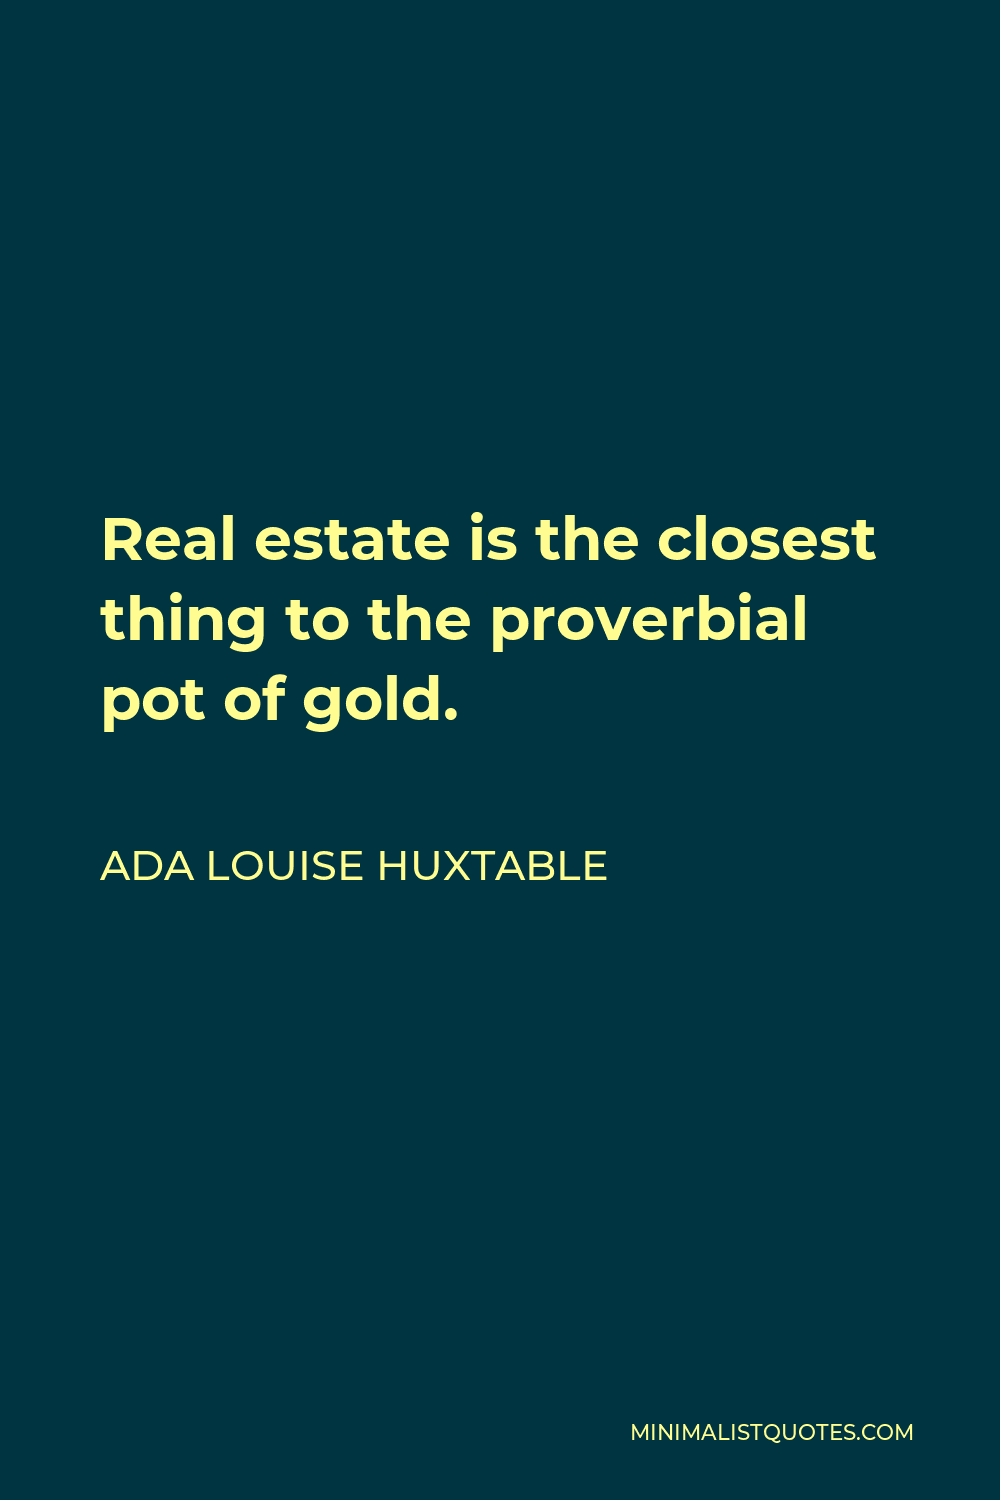 Ada Louise Huxtable Quote - Real estate is the closest thing to the proverbial pot of gold.